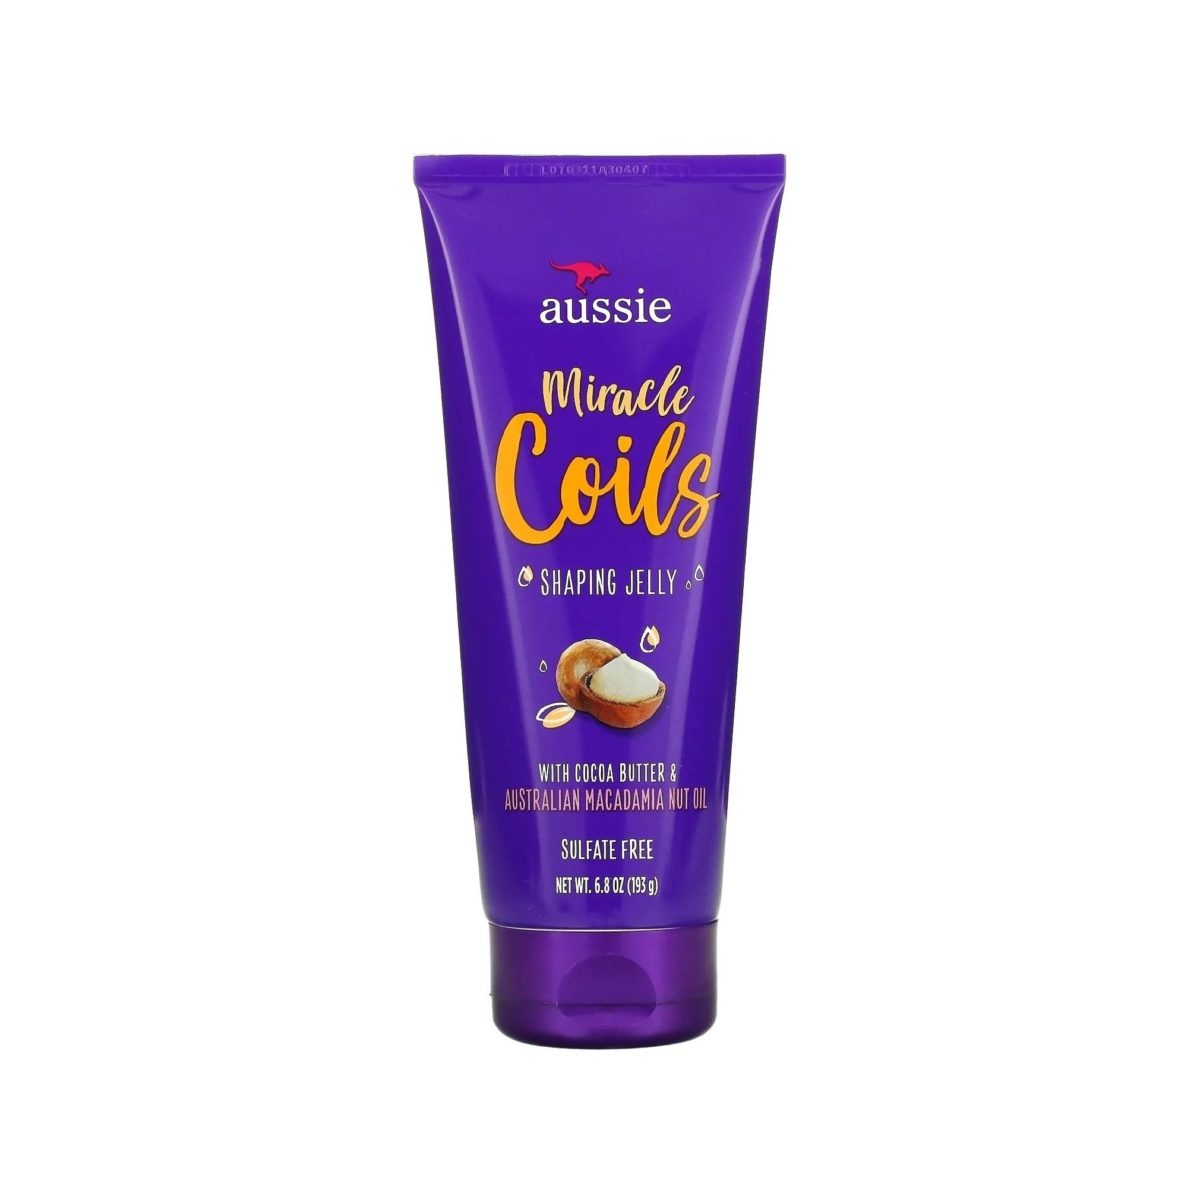 Aussie - miracle coils shaping gelly Ohmykajo curly hair care, hair loss treatment, curly hair products Aussie - miracle coils shaping gelly